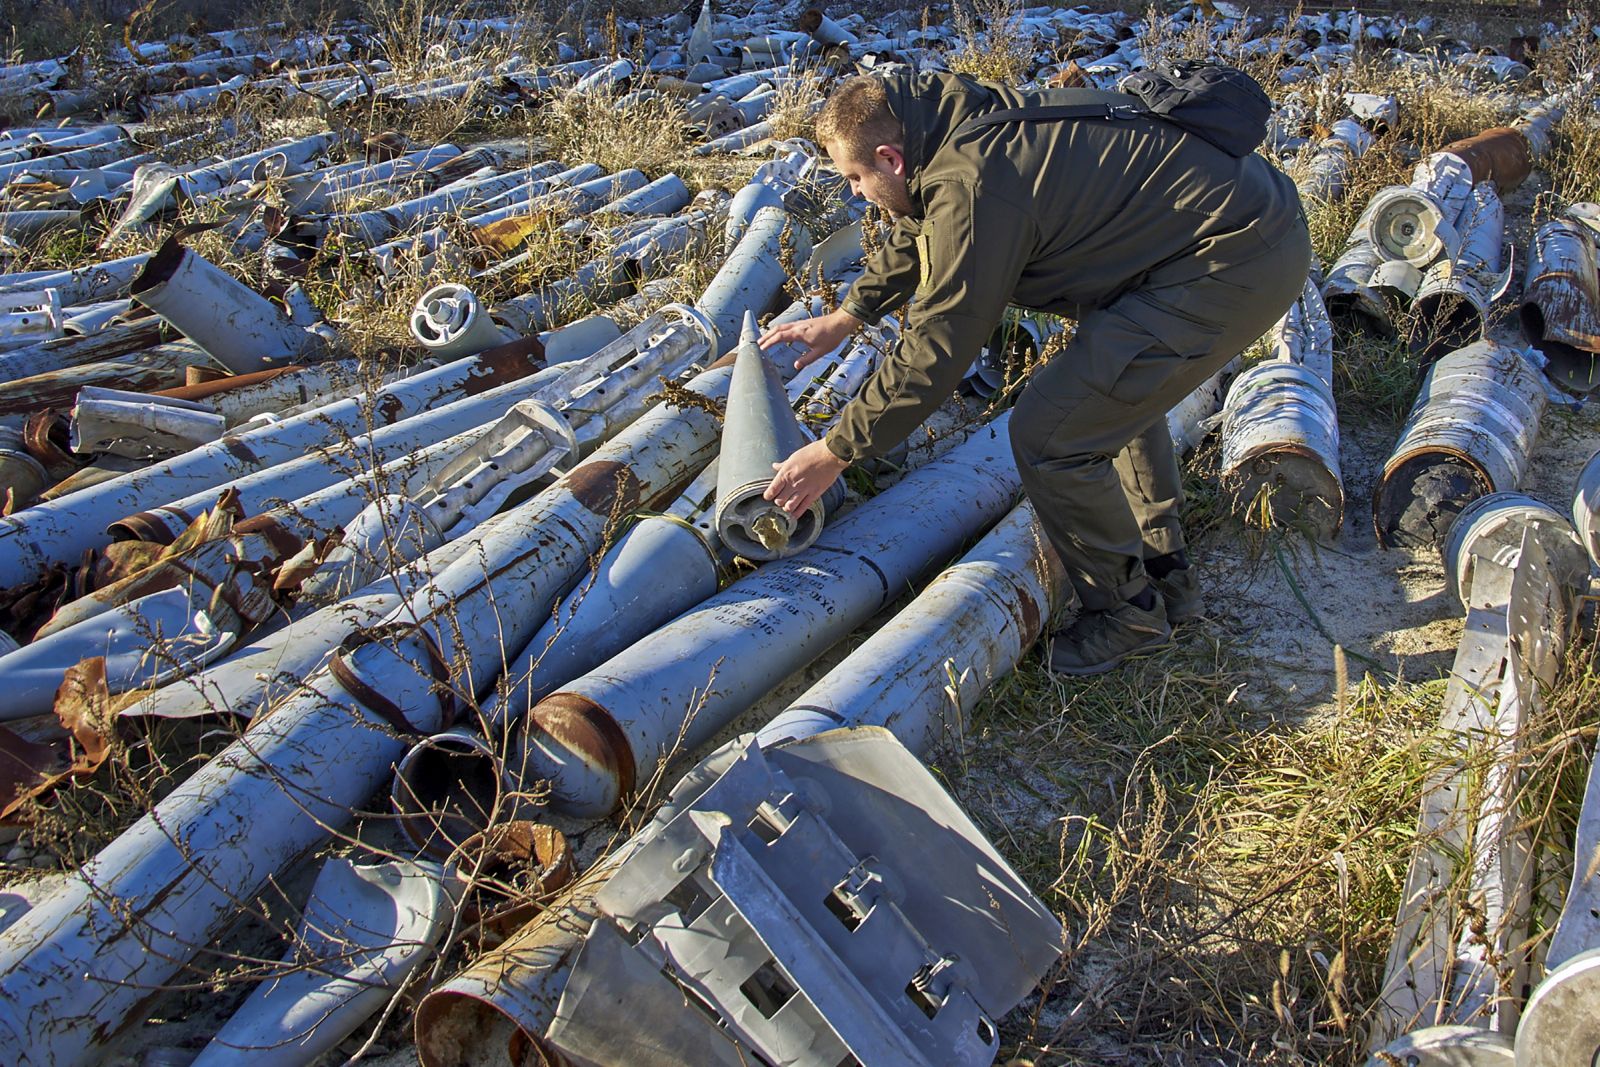 epa10337013 A worker of the prosecutor's office looks at used missiles which was collected after shellings and is presented as evidence of Russian shellings against civilian targets, in Kharkiv, Ukraine, 29 November 2022. Kharkiv and surrounding areas have been the target of heavy shelling since February 2022, when Russian troops entered Ukraine starting a conflict that has provoked destruction and a humanitarian crisis. At the beginning of September, the Ukrainian army pushed Russian forces from occupied territory northeast of the country in counterattacks.  EPA/SERGEY KOZLOV